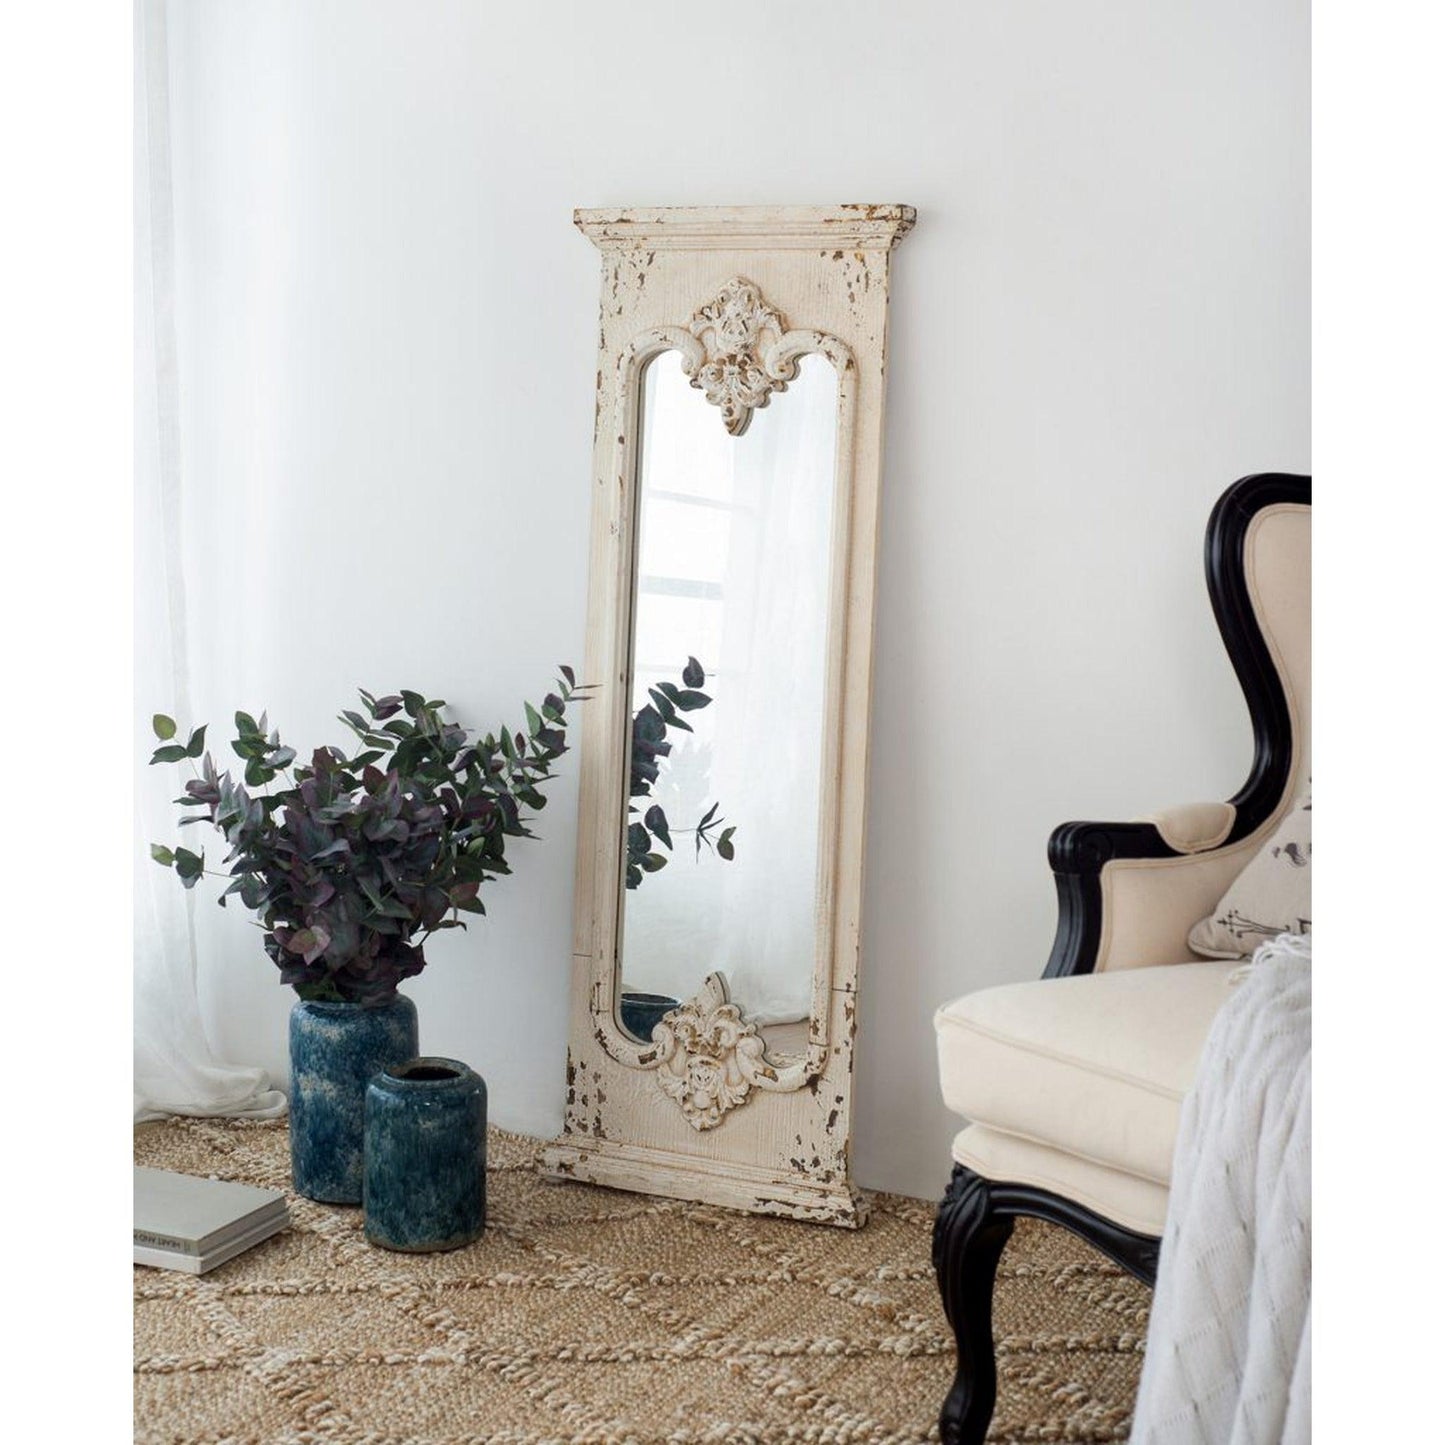 A&B Home 22" x 59" Bundle of 7 Rectangular Distressed White Wooden Frame Wall-Mounted Mirror